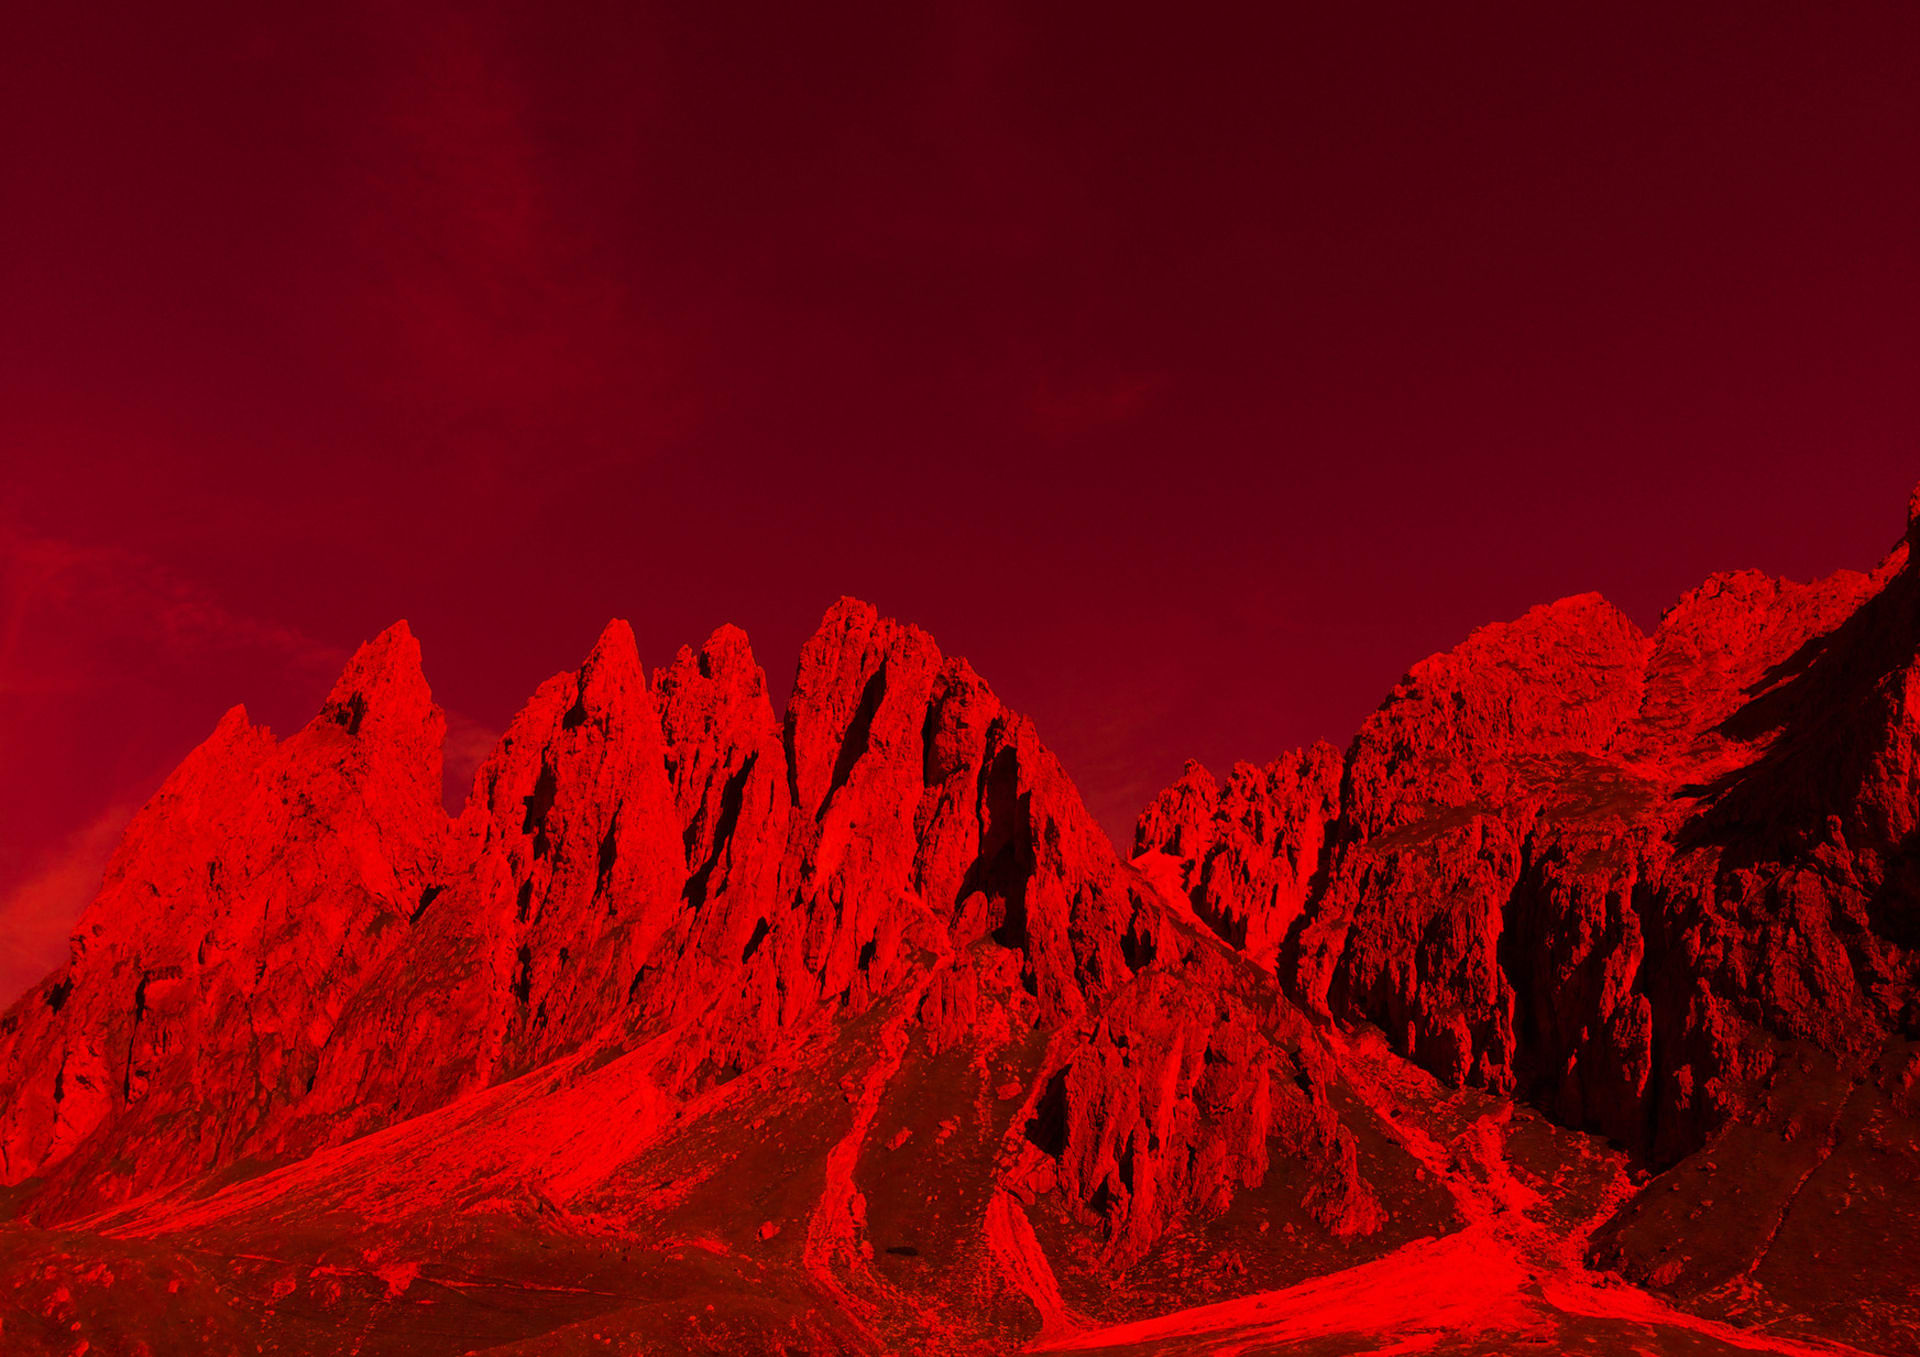 a picture of red mountains, the Dolomites in northern Italy, with a bright red filter over the image.